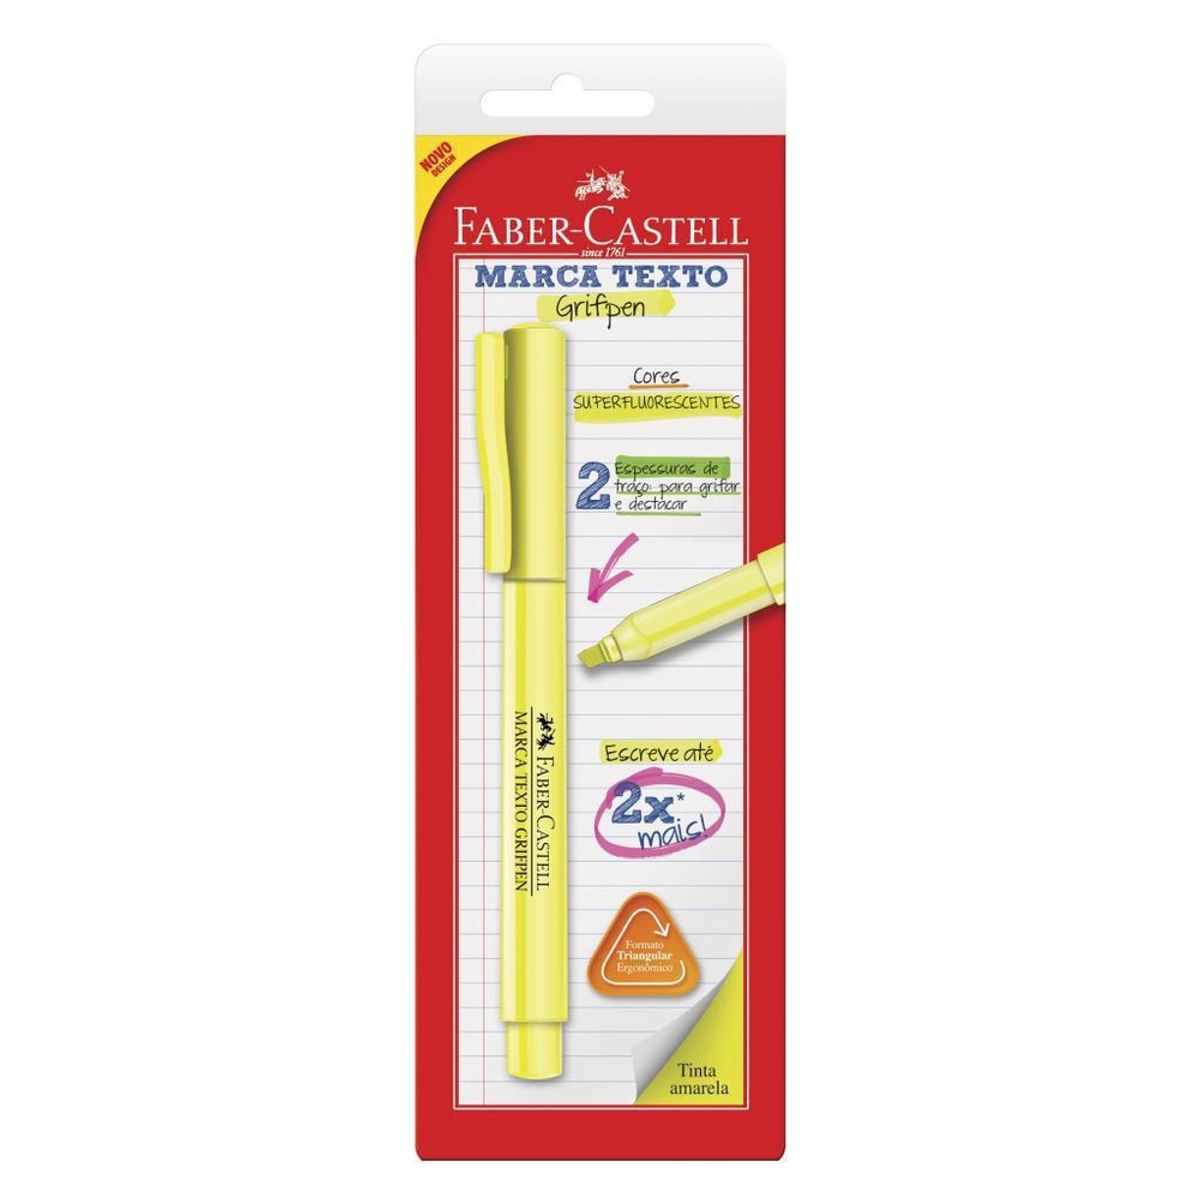 Marca Texto Faber Castell Grifpen Amarelo image number 0